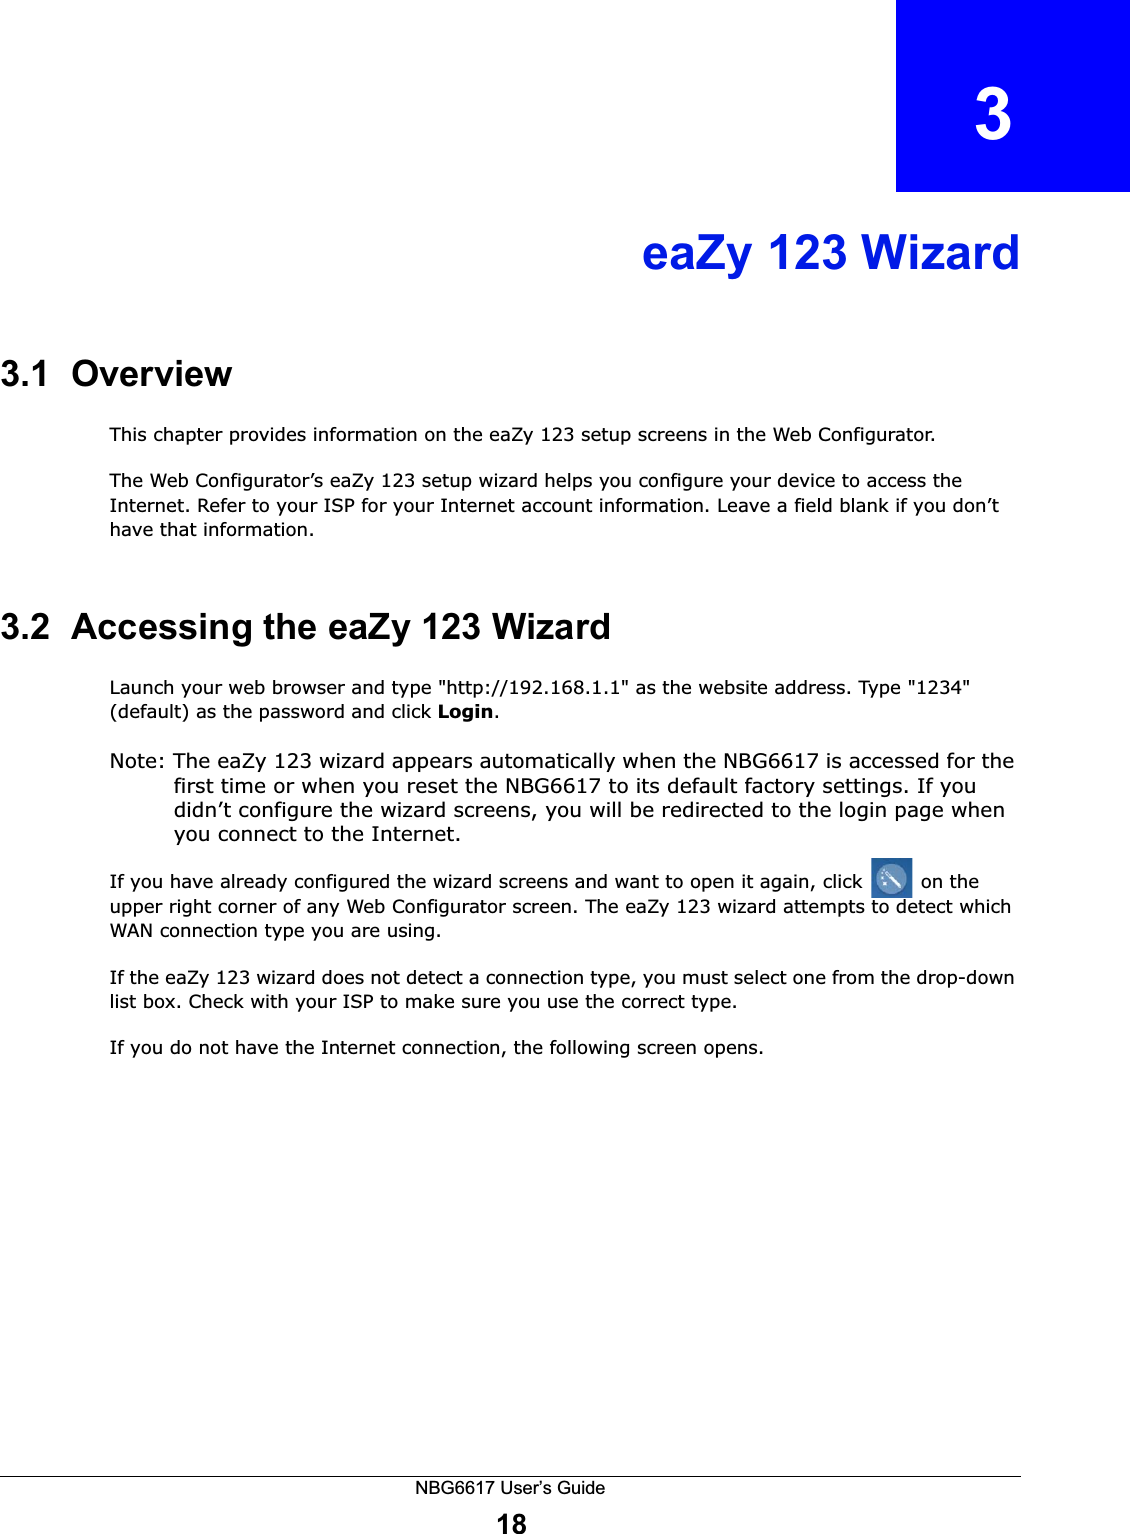 NBG6617 User’s Guide18CHAPTER   3eaZy 123 Wizard3.1  OverviewThis chapter provides information on the eaZy 123 setup screens in the Web Configurator.The Web Configurator’s eaZy 123 setup wizard helps you configure your device to access the Internet. Refer to your ISP for your Internet account information. Leave a field blank if you don’t have that information.3.2  Accessing the eaZy 123 WizardLaunch your web browser and type &quot;http://192.168.1.1&quot; as the website address. Type &quot;1234&quot; (default) as the password and click Login.Note: The eaZy 123 wizard appears automatically when the NBG6617 is accessed for the first time or when you reset the NBG6617 to its default factory settings. If you didn’t configure the wizard screens, you will be redirected to the login page when you connect to the Internet.If you have already configured the wizard screens and want to open it again, click   on the upper right corner of any Web Configurator screen. The eaZy 123 wizard attempts to detect which WAN connection type you are using. If the eaZy 123 wizard does not detect a connection type, you must select one from the drop-down list box. Check with your ISP to make sure you use the correct type.If you do not have the Internet connection, the following screen opens.